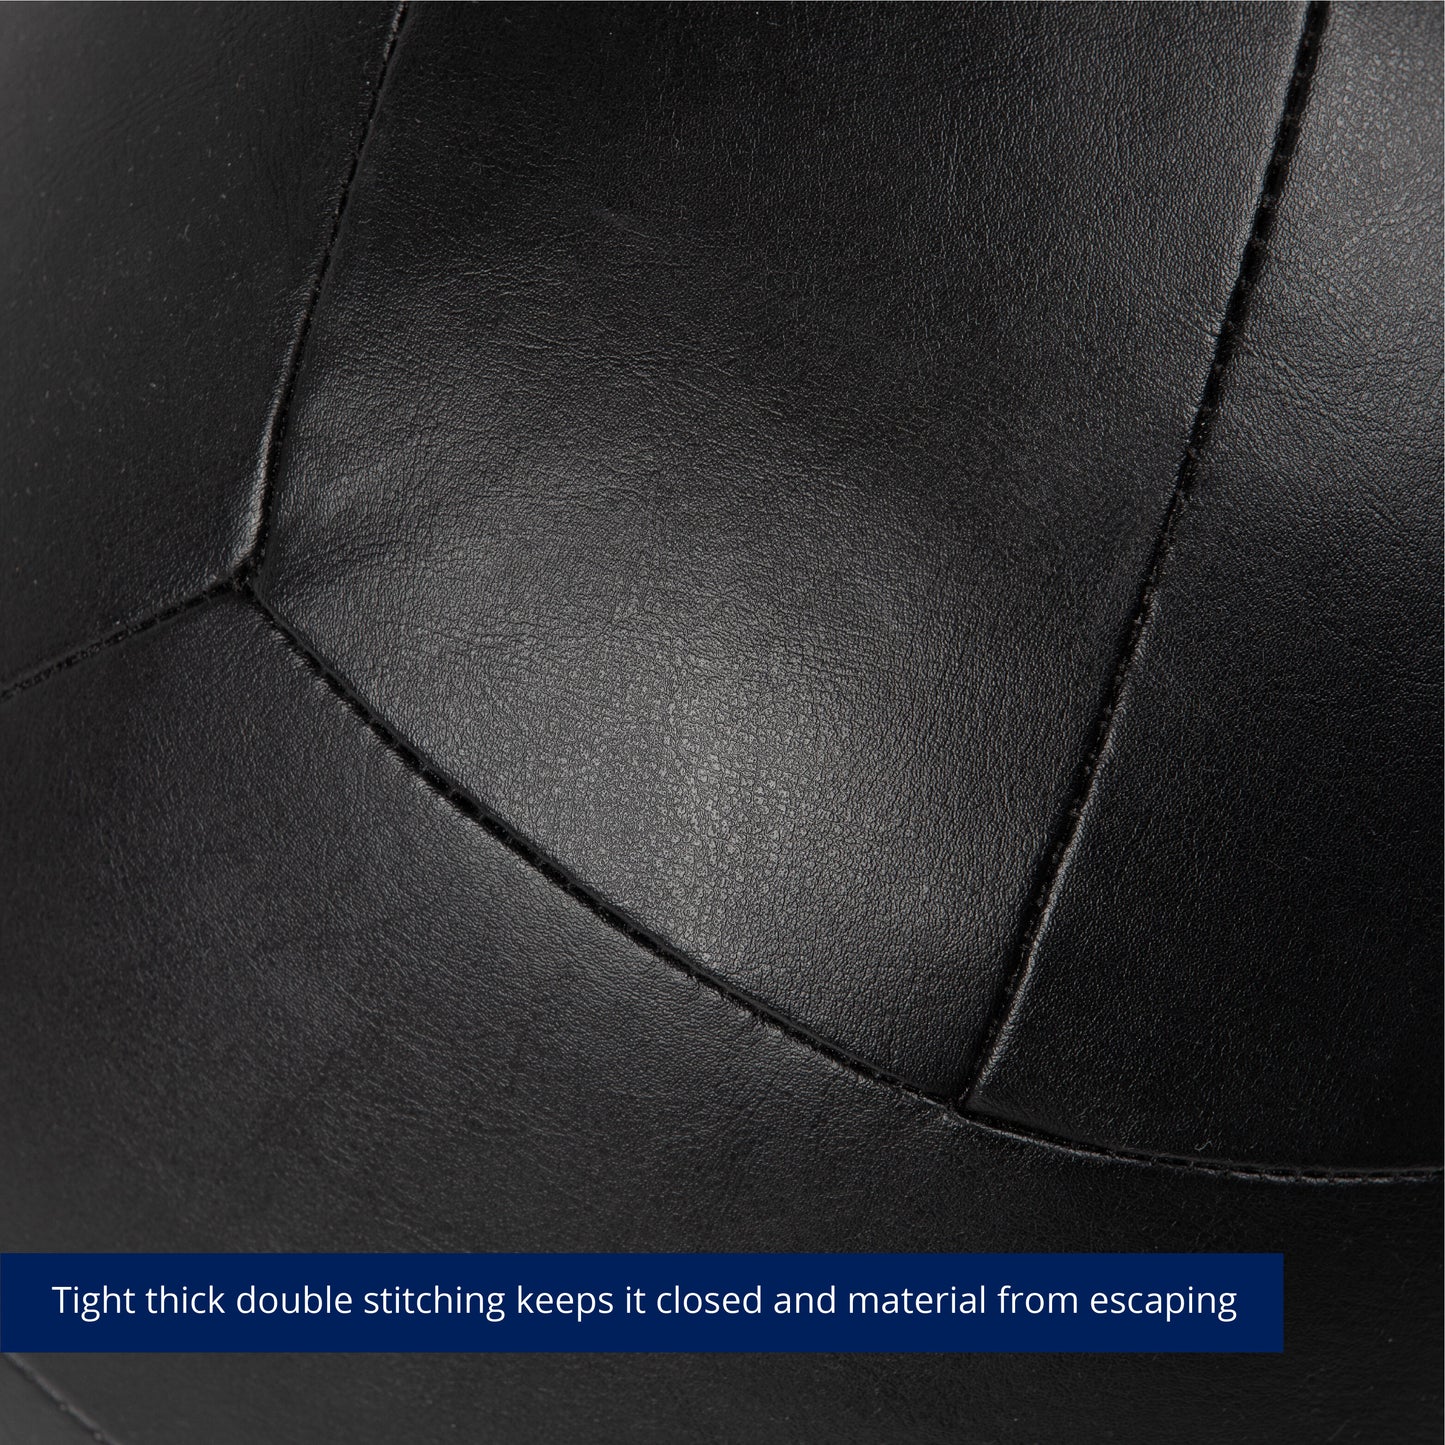 20 LB Soft Leather Medicine Wall Ball - view 4